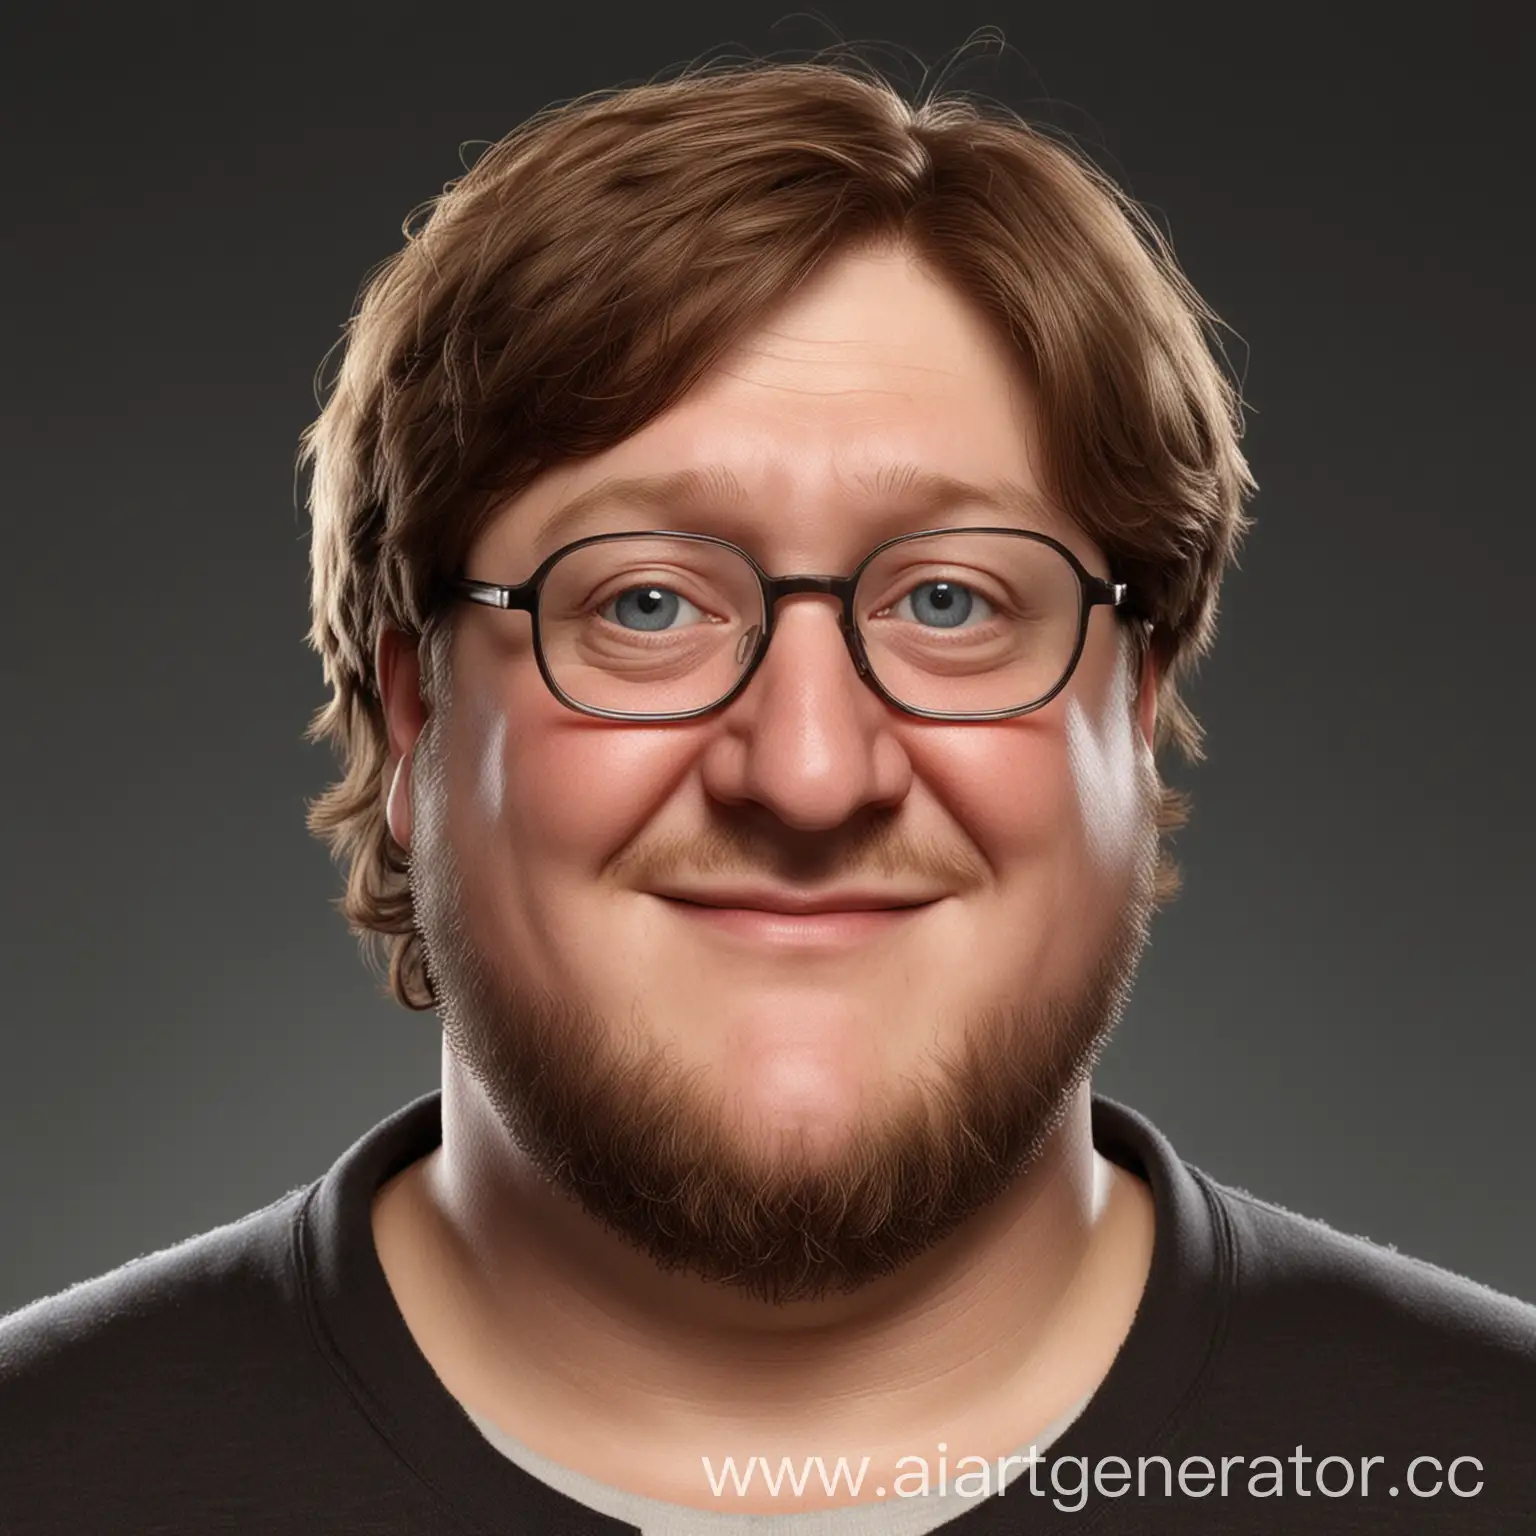 Imagine what Gabe Newell's funny son must look like